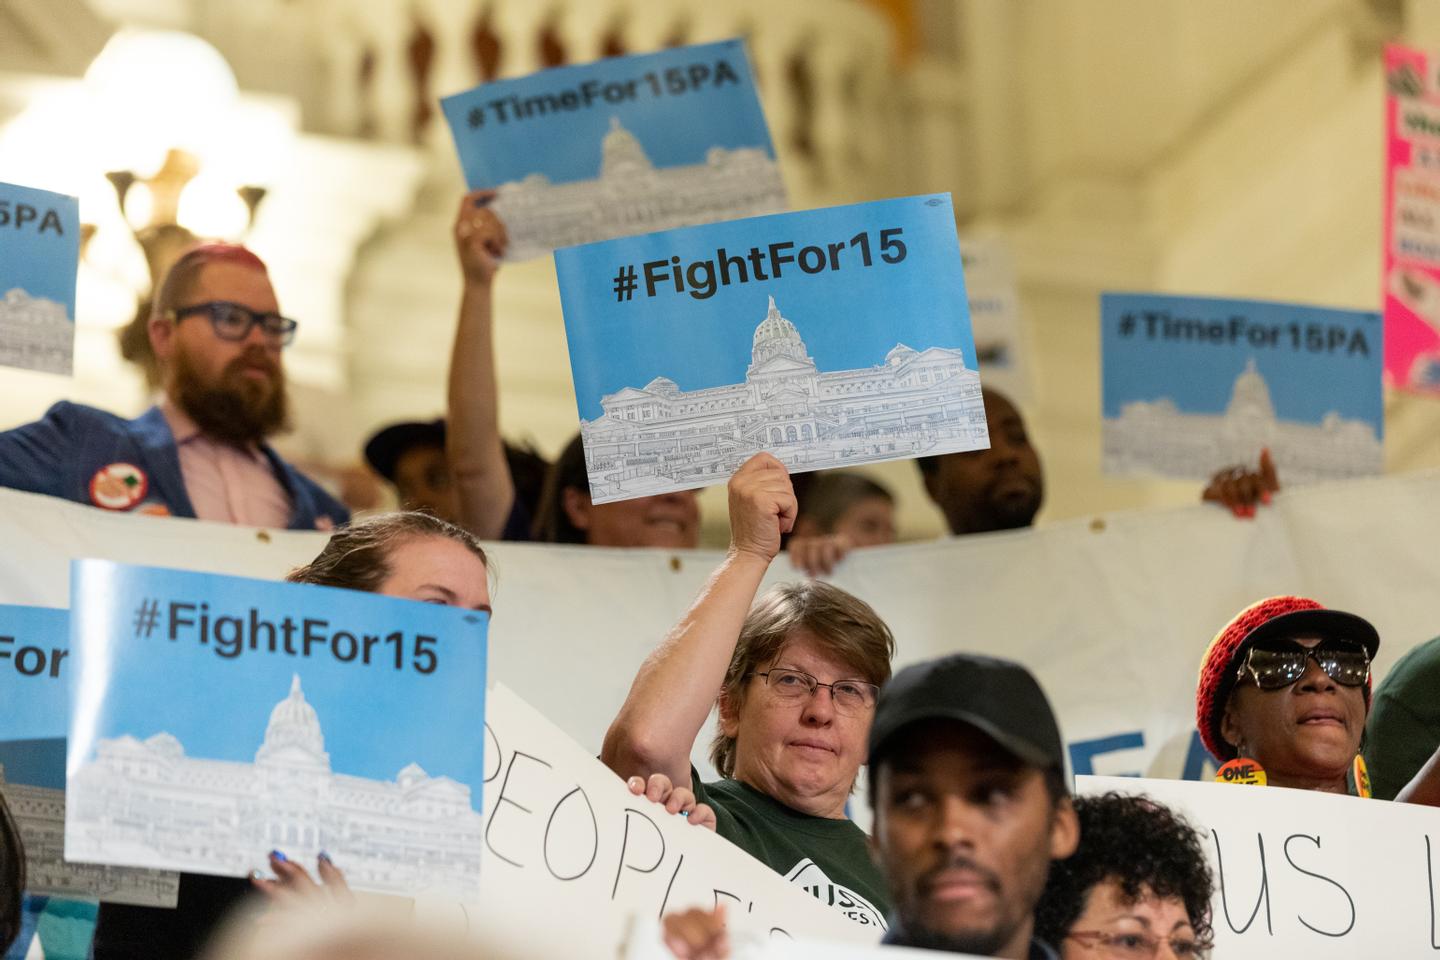 5 things to know about the 15 minimum wage debate in Pa.